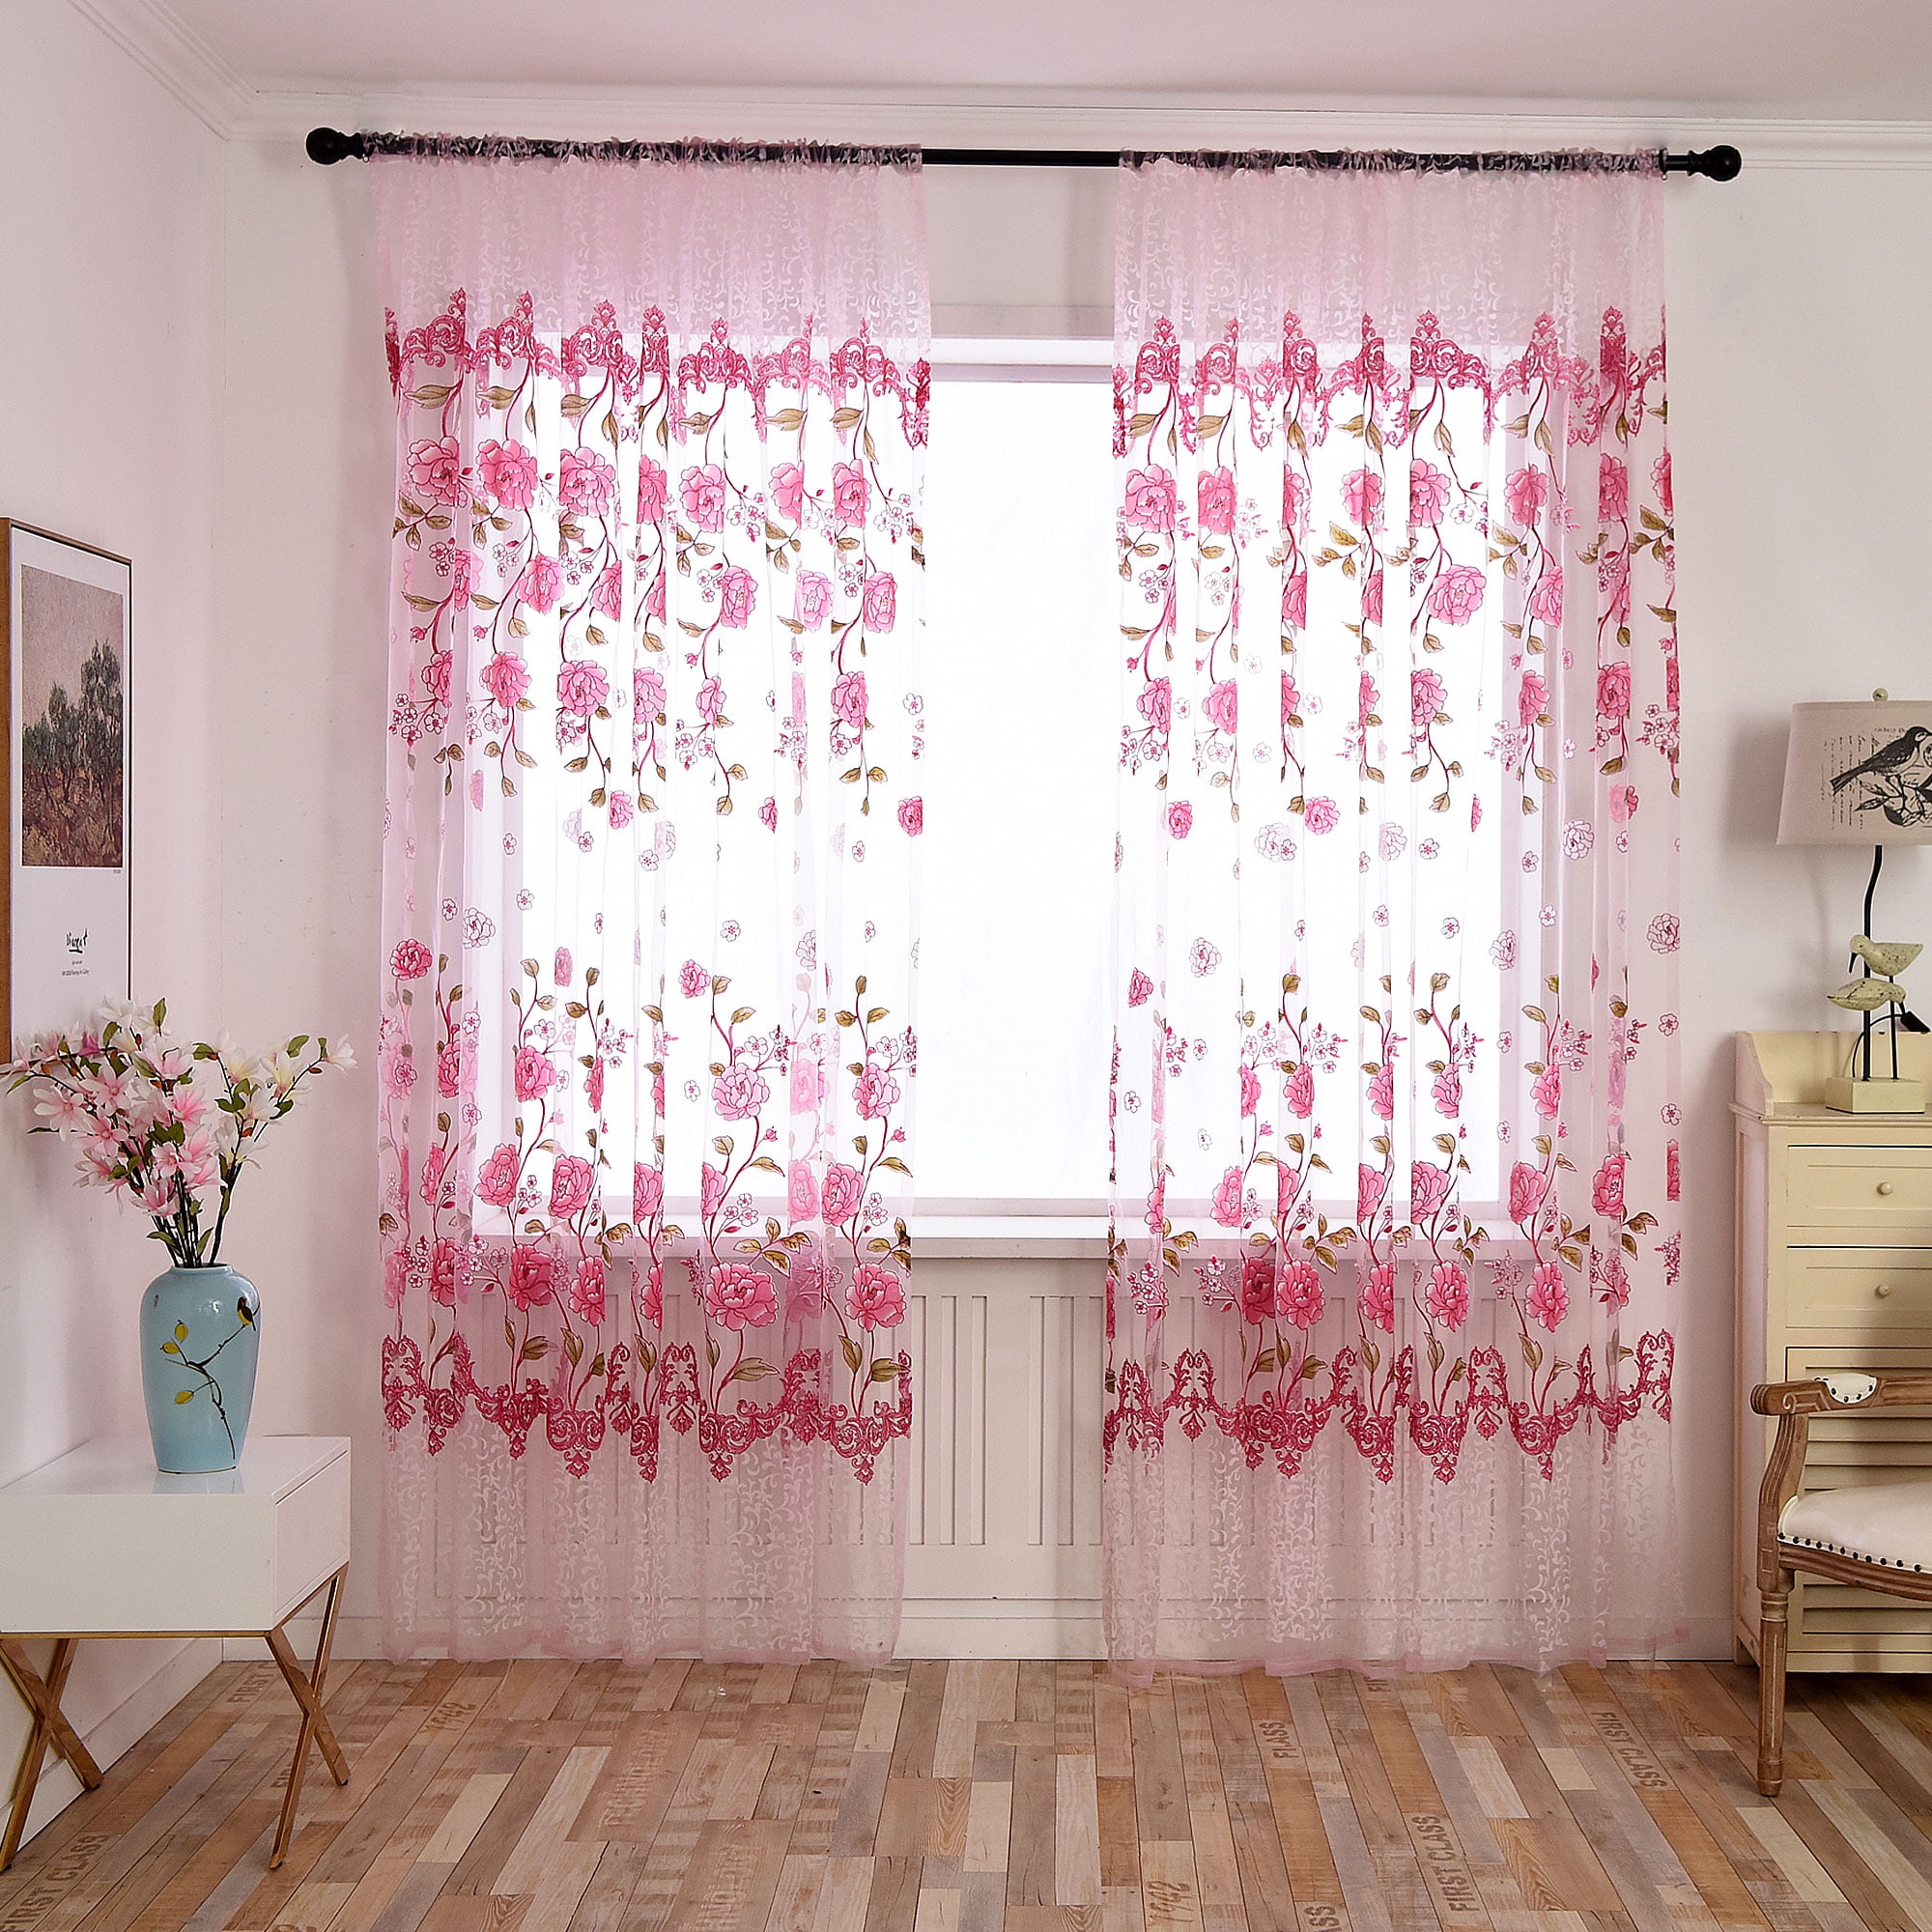 New Floral Voile Window Curtain Blackout Tulle Curtain Living Room Drape Panel 